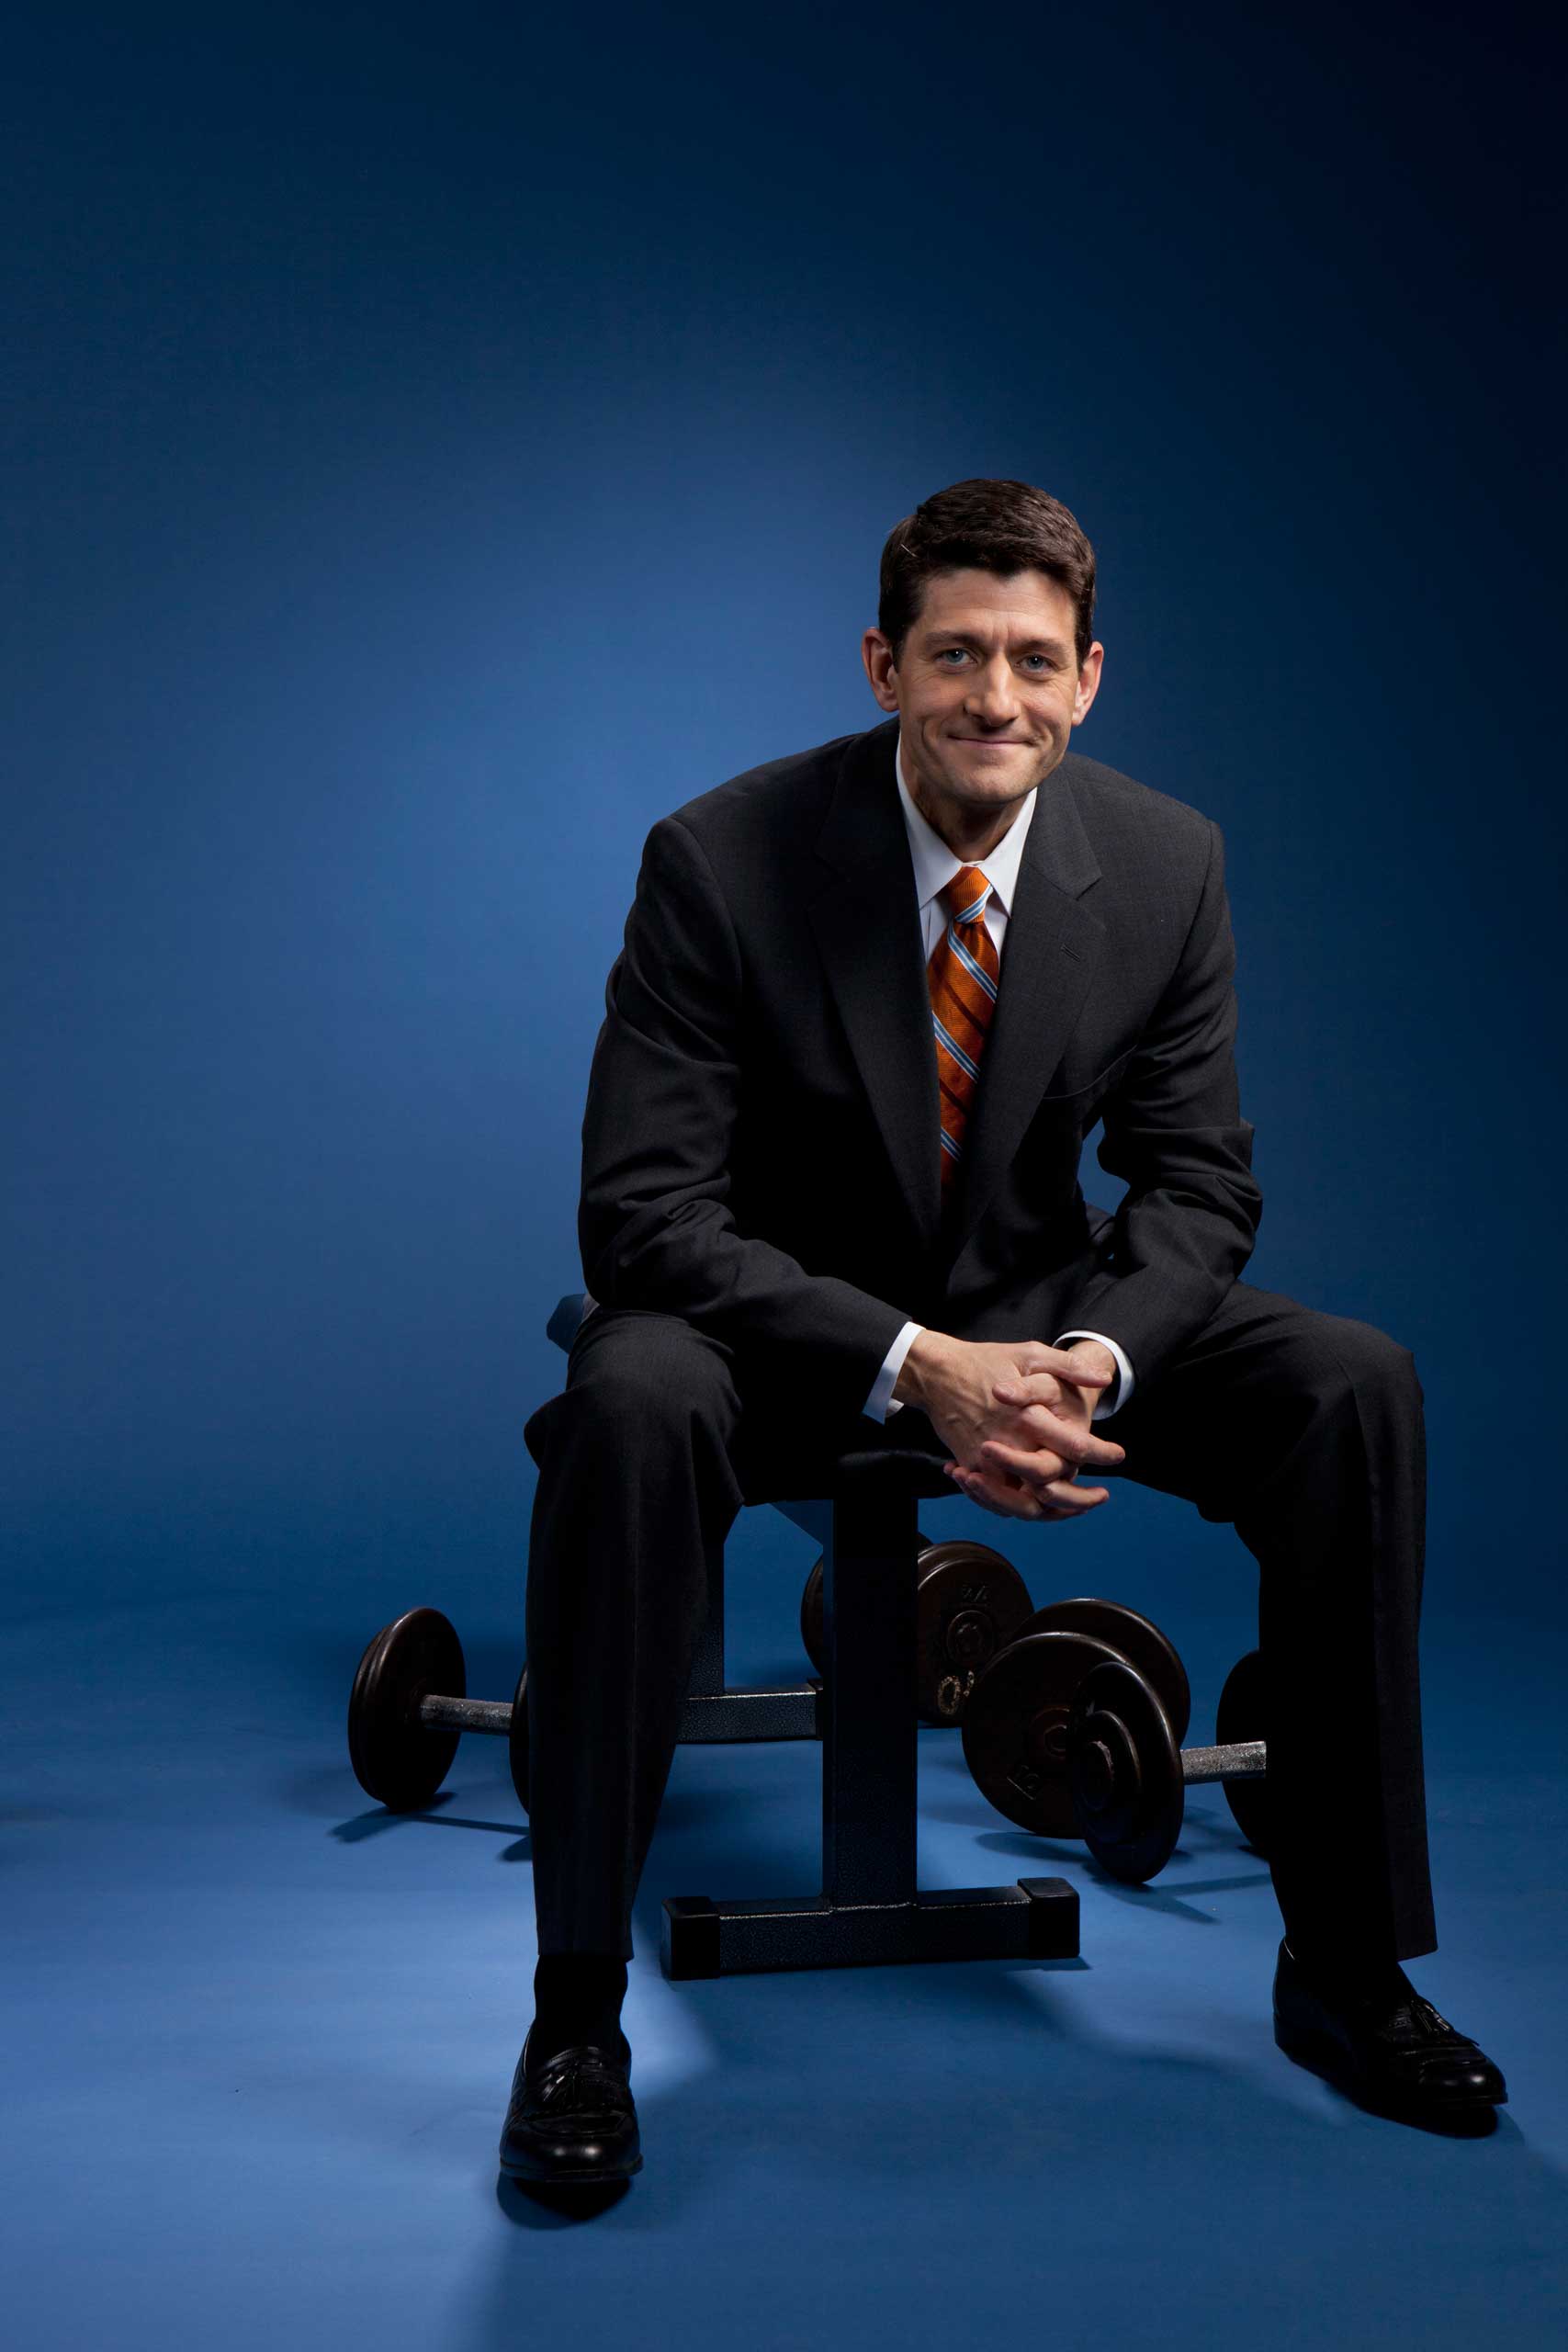 A final outtake from the Paul Ryan photo shoot